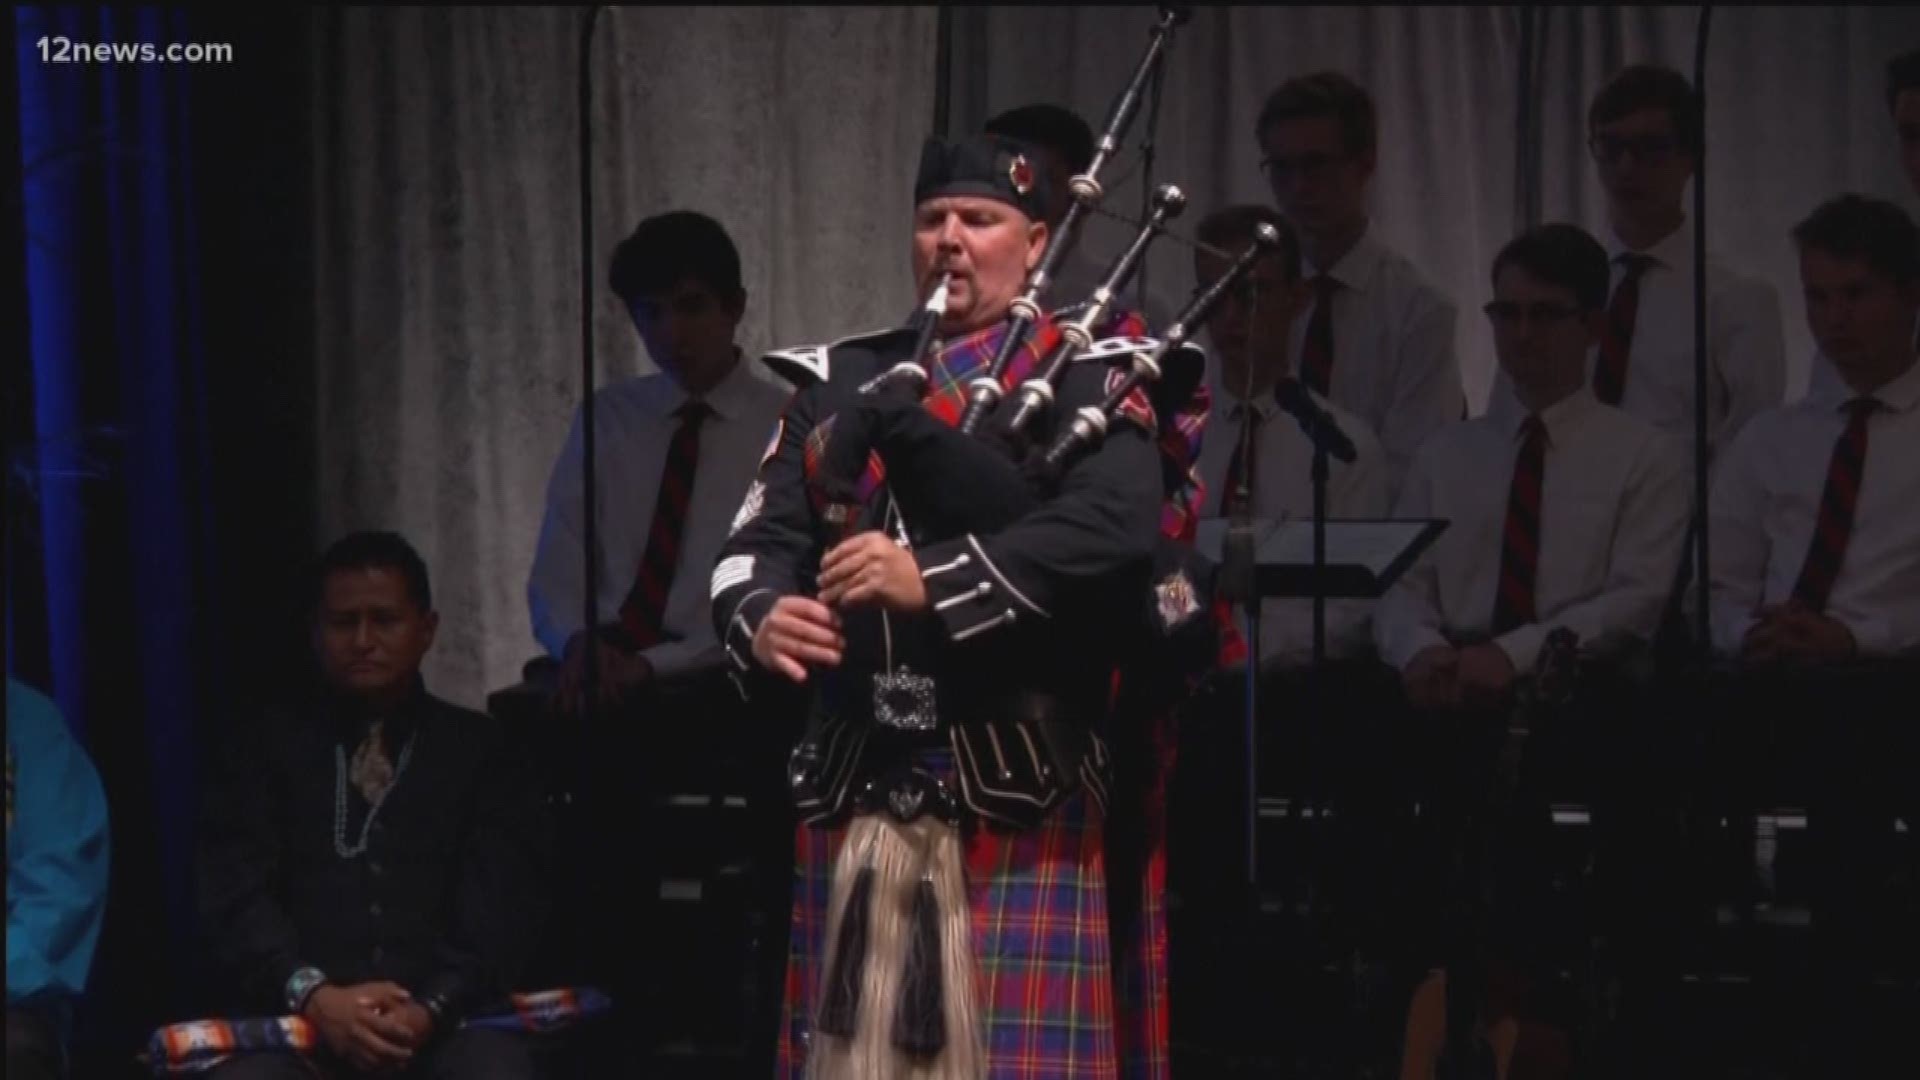 Bagpipes play as tribute to John McCain during memorial service and closing remarks from the pastor of North Phoenix Baptist Church.